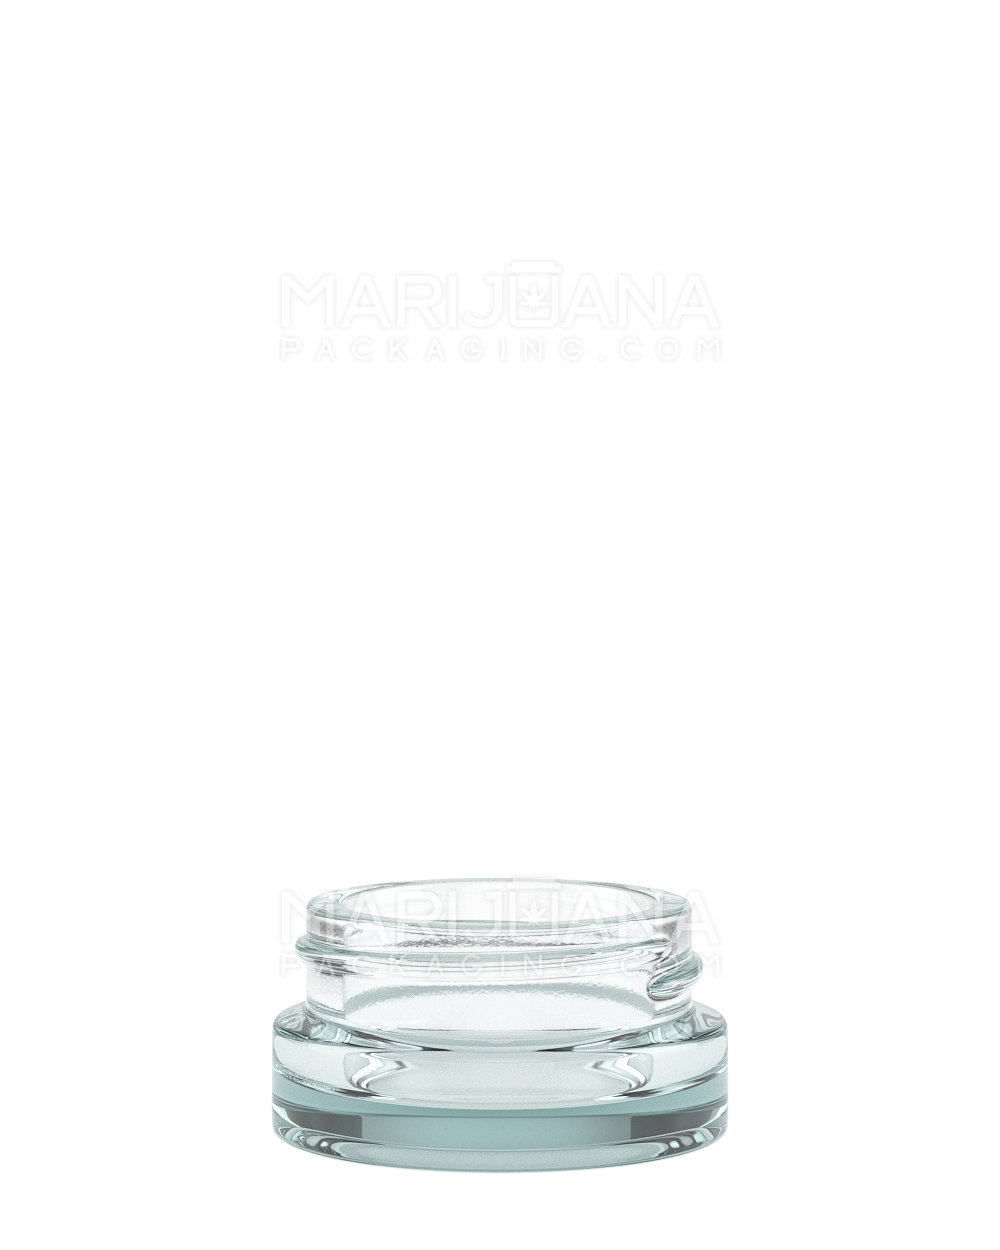 Clear Glass Concentrate Containers | 38mm - 7mL - 350 Count - 1